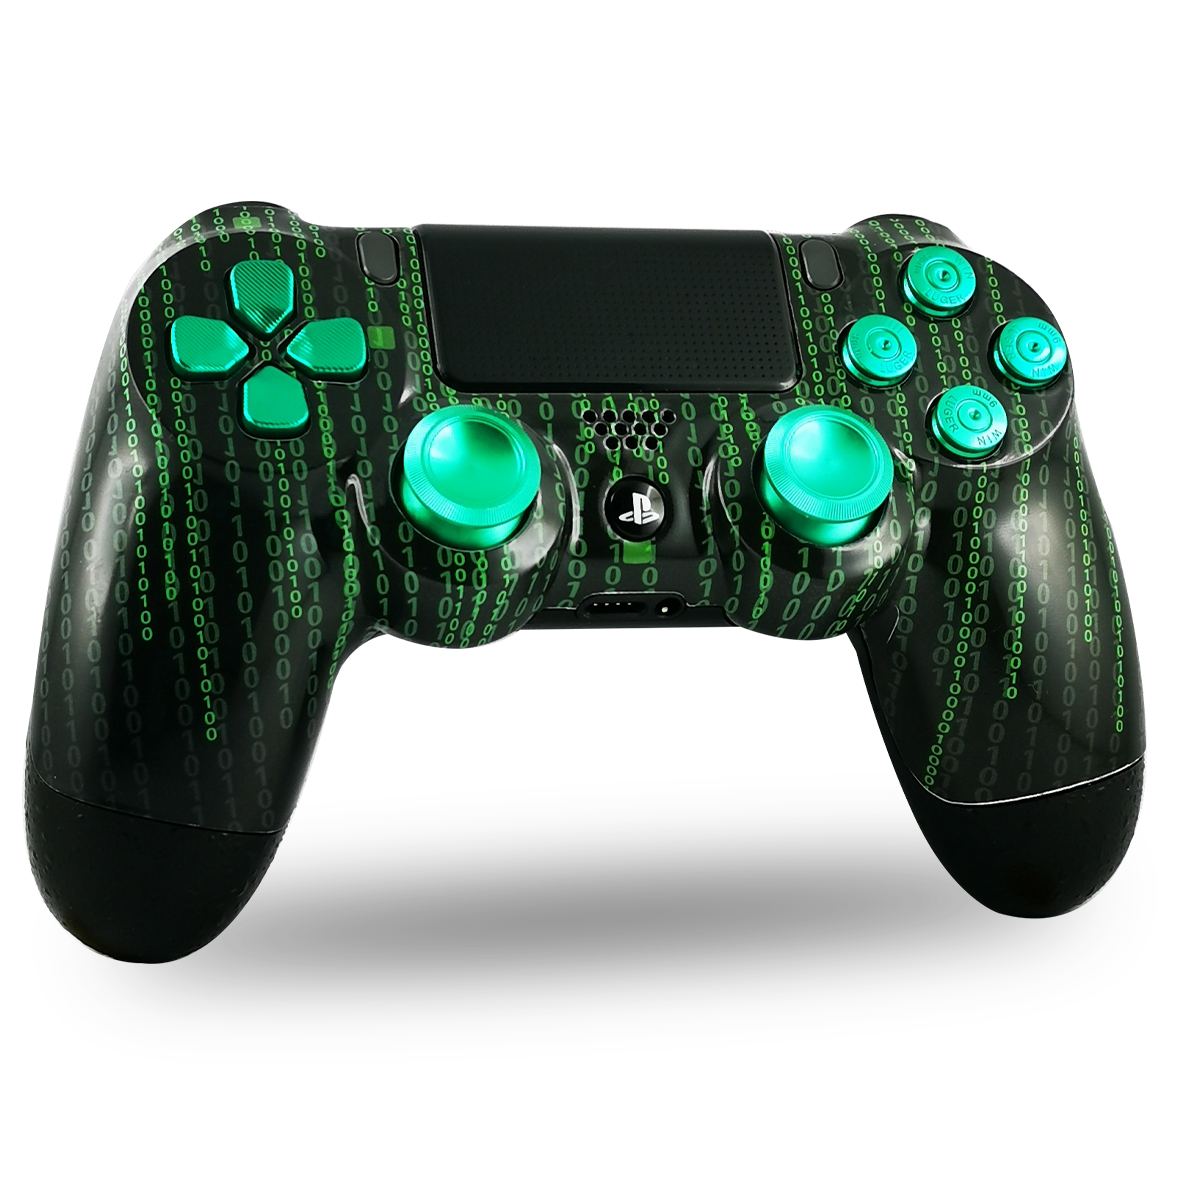 manette-PS4-custom-playstation-4-sony-personnalisee-drawmypad-Matrice